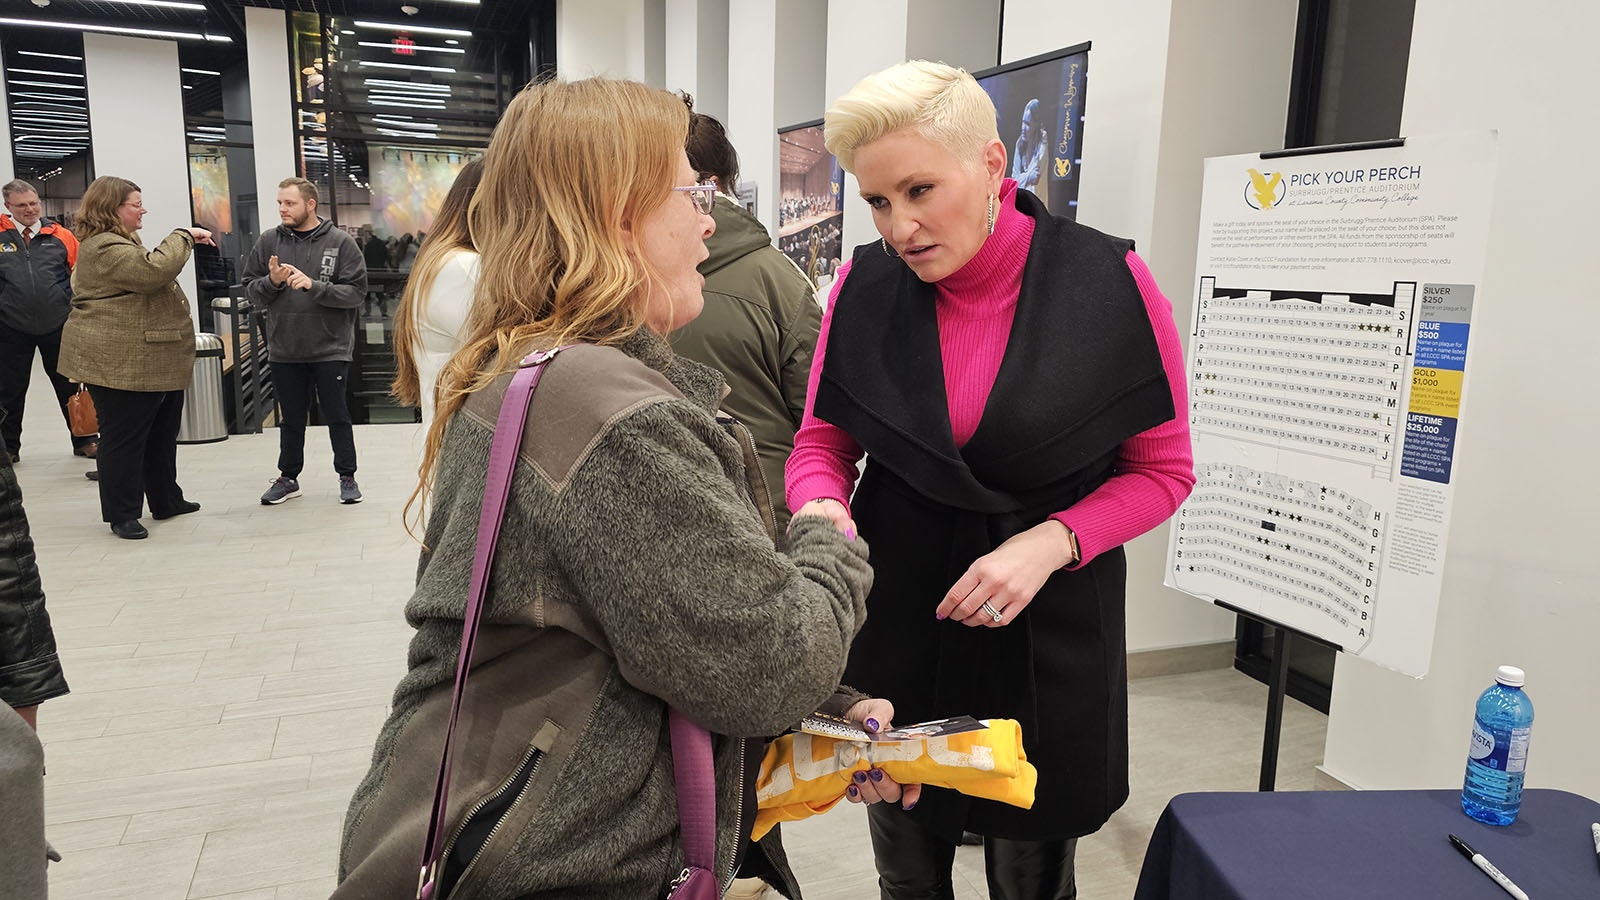 Nancy Rich, a student at Laramie County Community College studying business and accounting, shakes hand with Amanda Brinkman, who was in Wyoming on Thursday to talk about lessons learned from her hit reality television series.